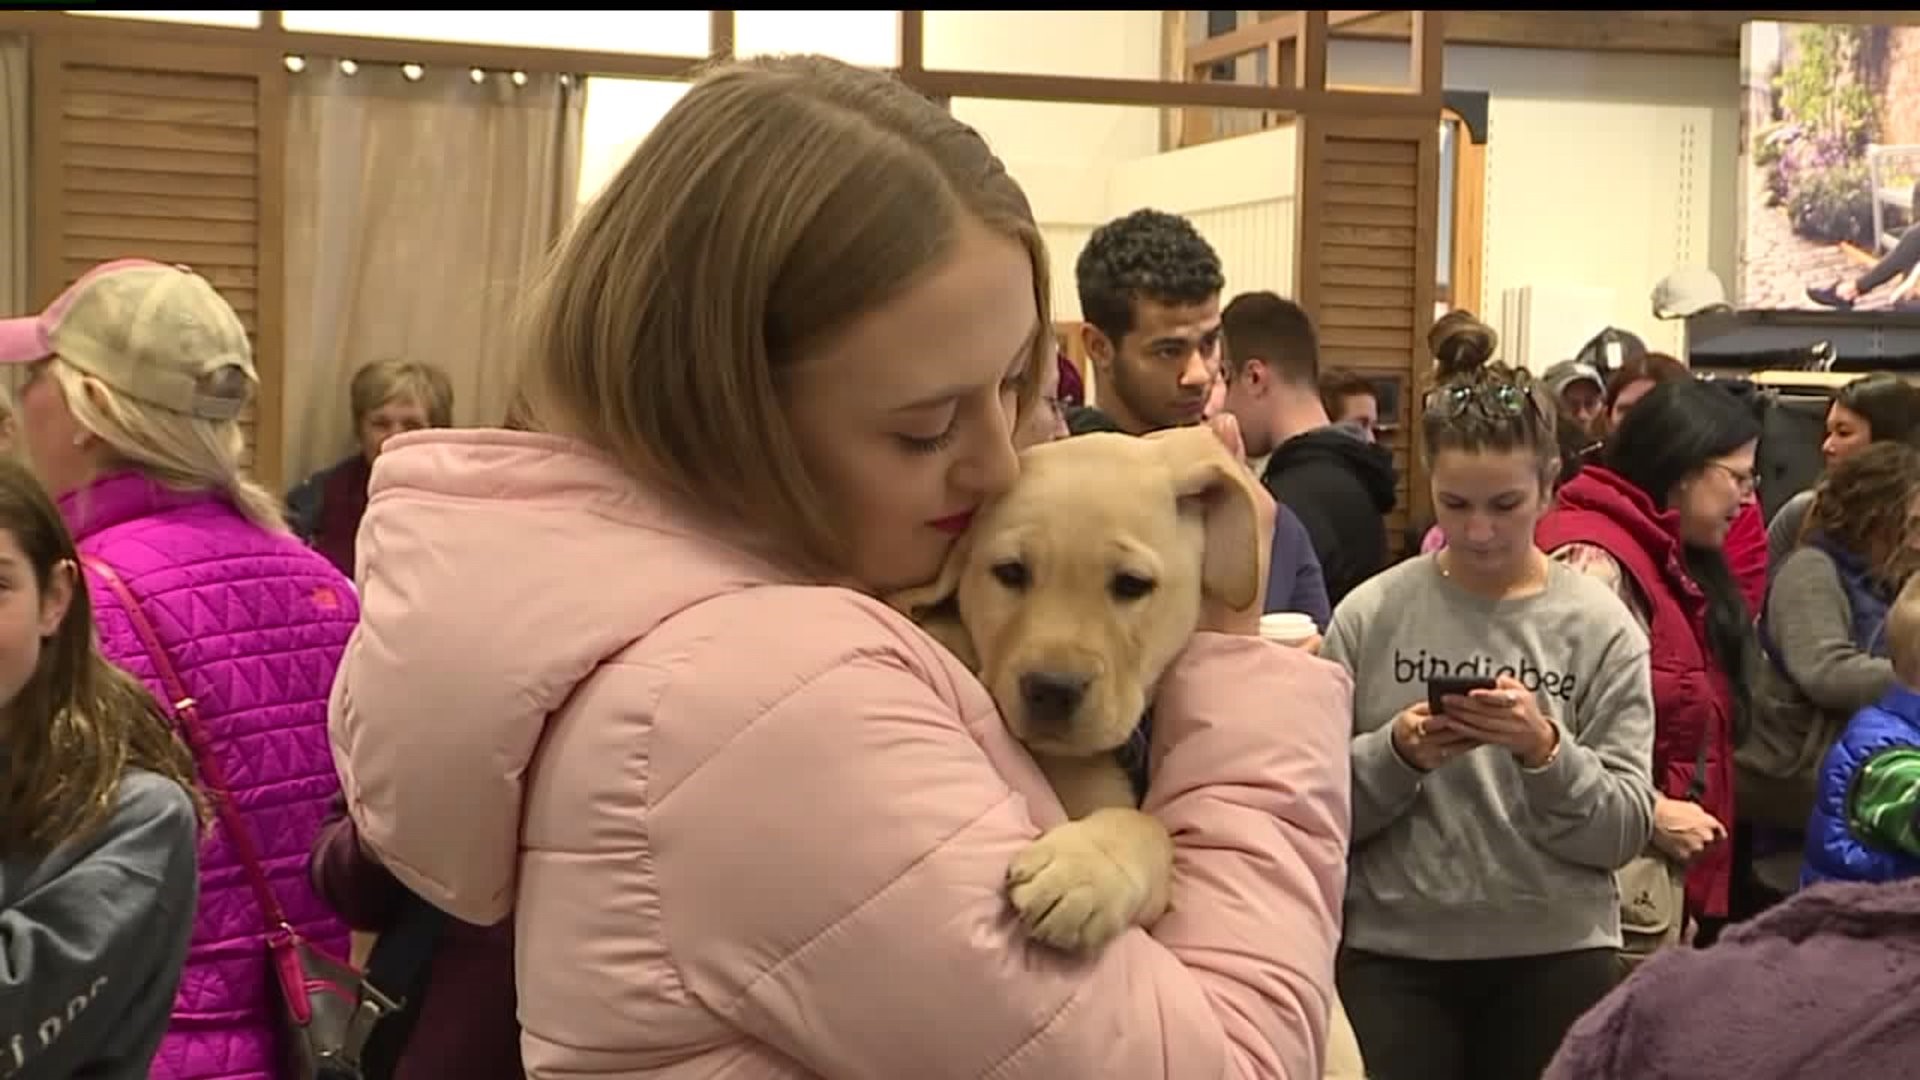 Puppy cuddles & kisses ease stress for shoppers in Dauphin County